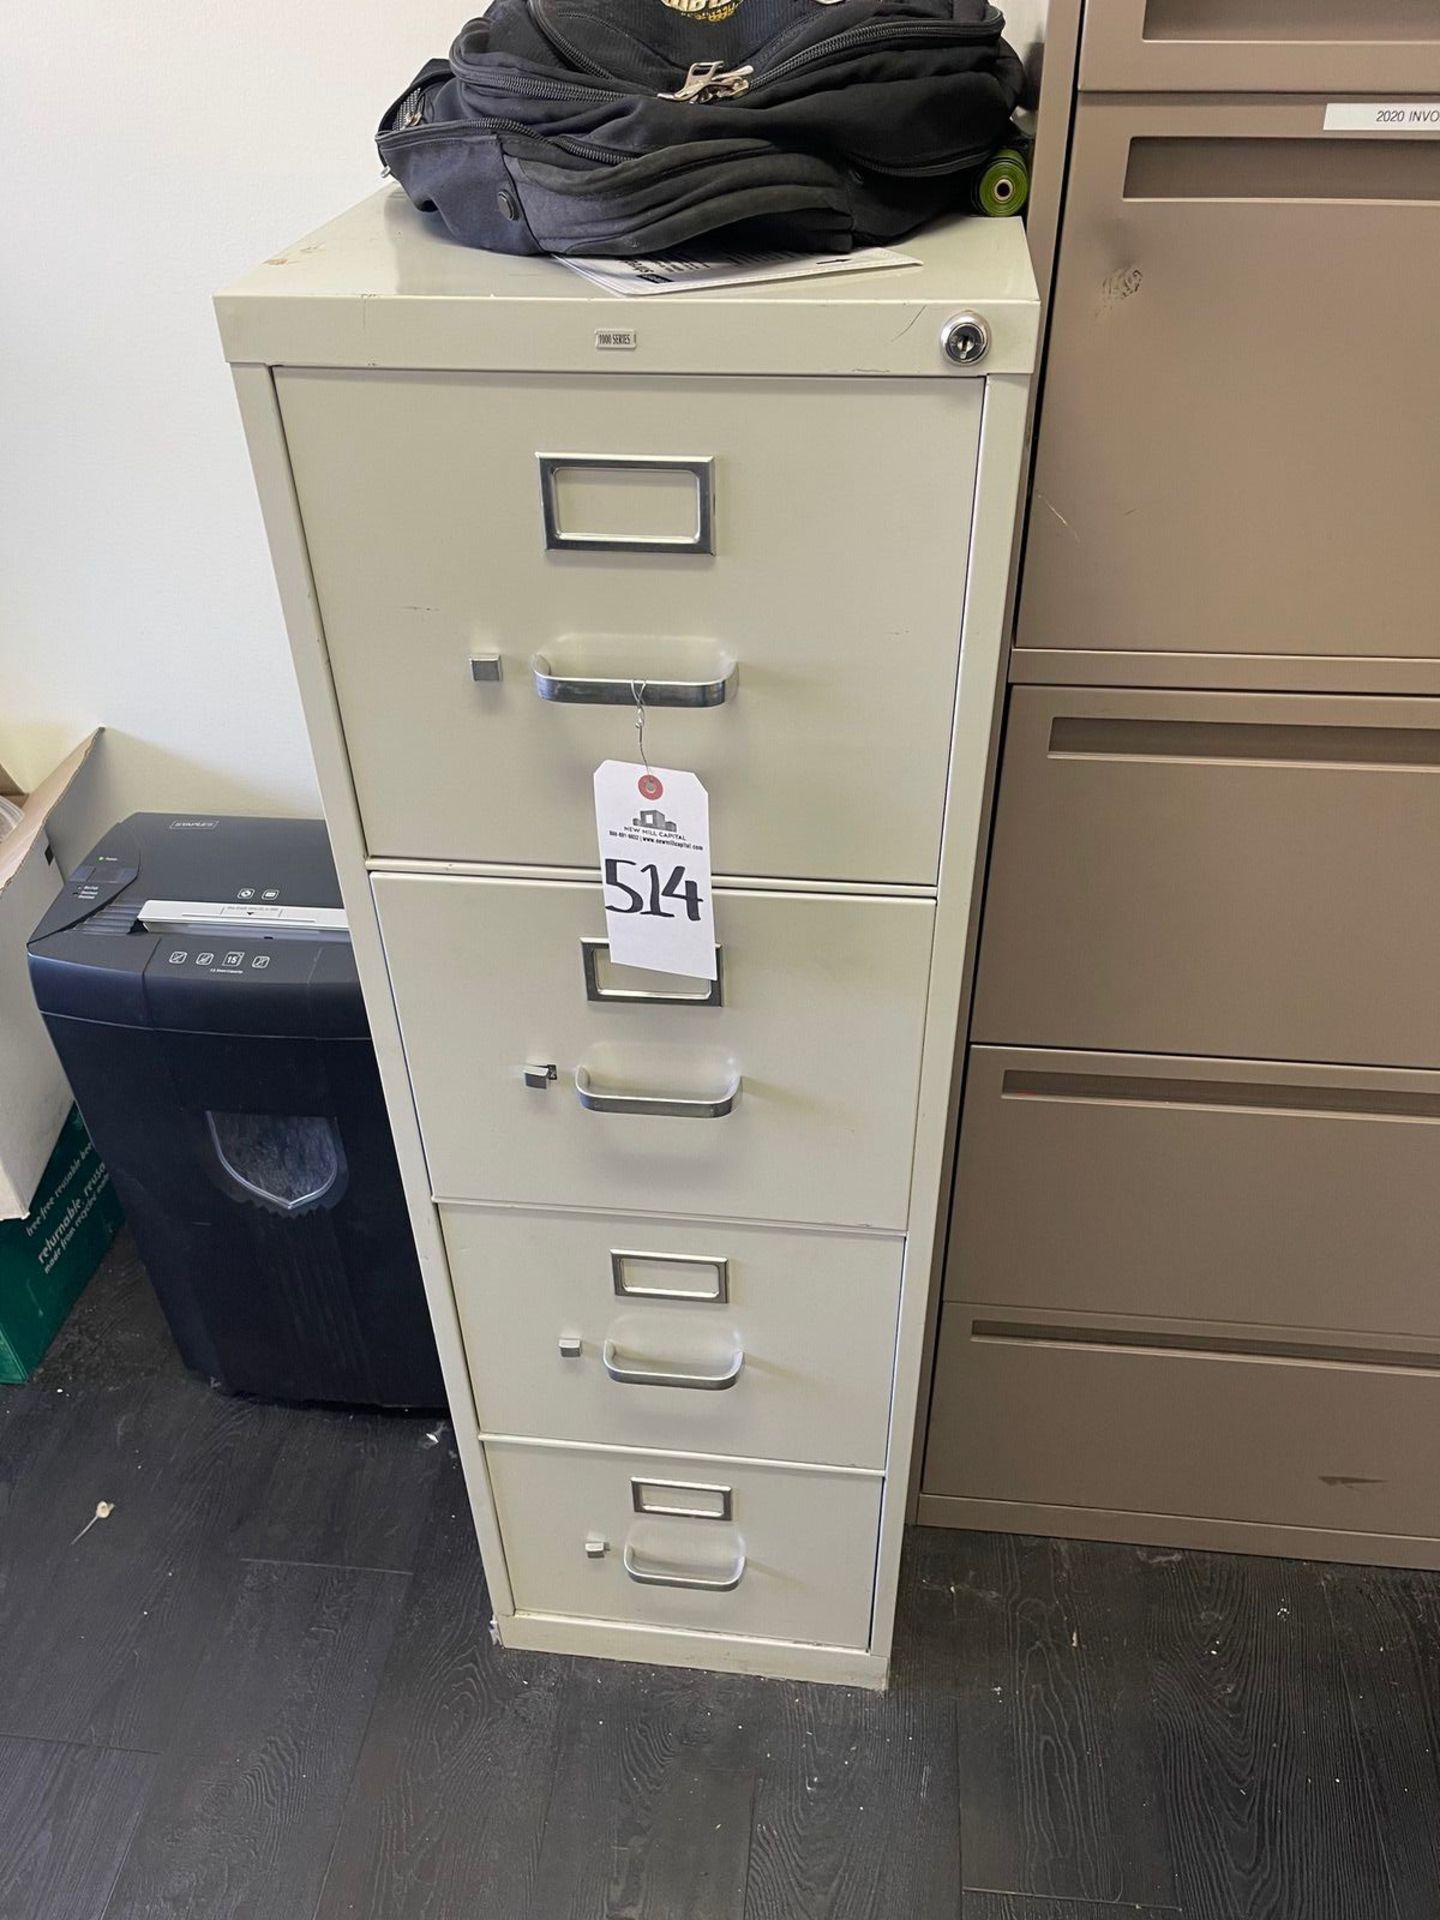 FILE CABINET, 4 DRAWER, 15"X26"X49" | Rig Fee: Buyer to remove or contact rigger